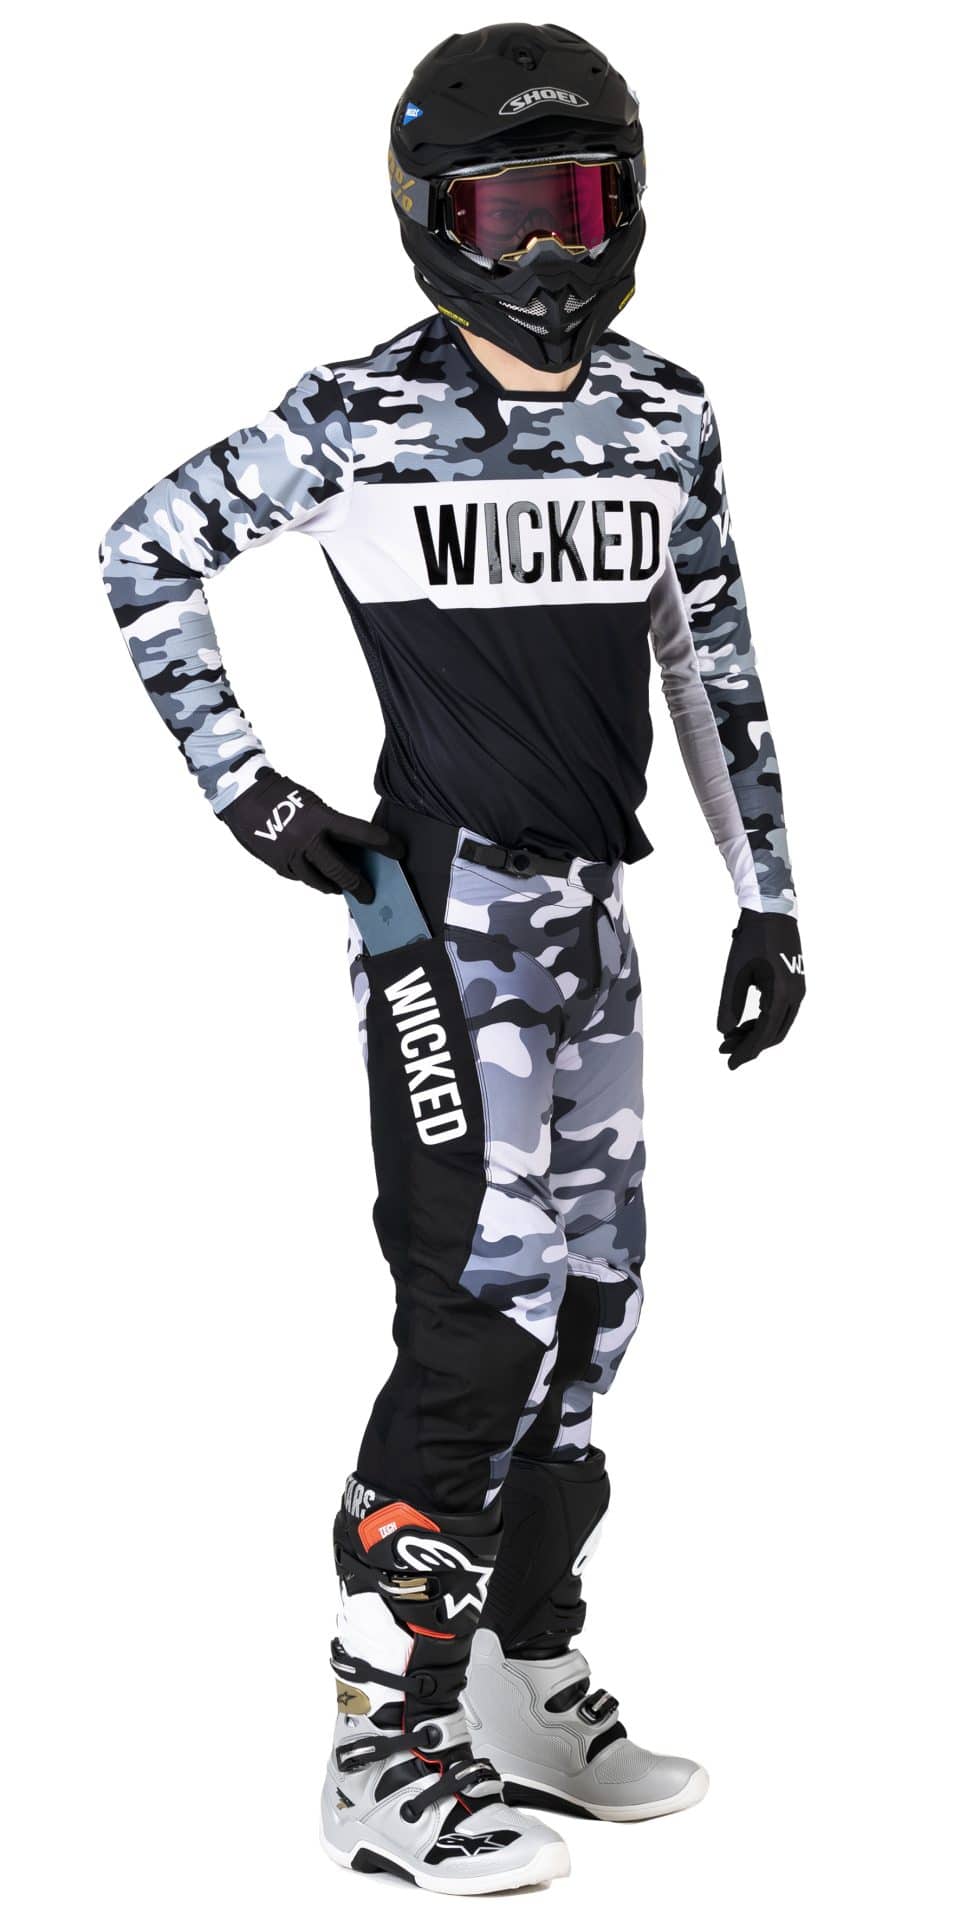 MX gear, street clothing and happy days - Get it at The Wicked